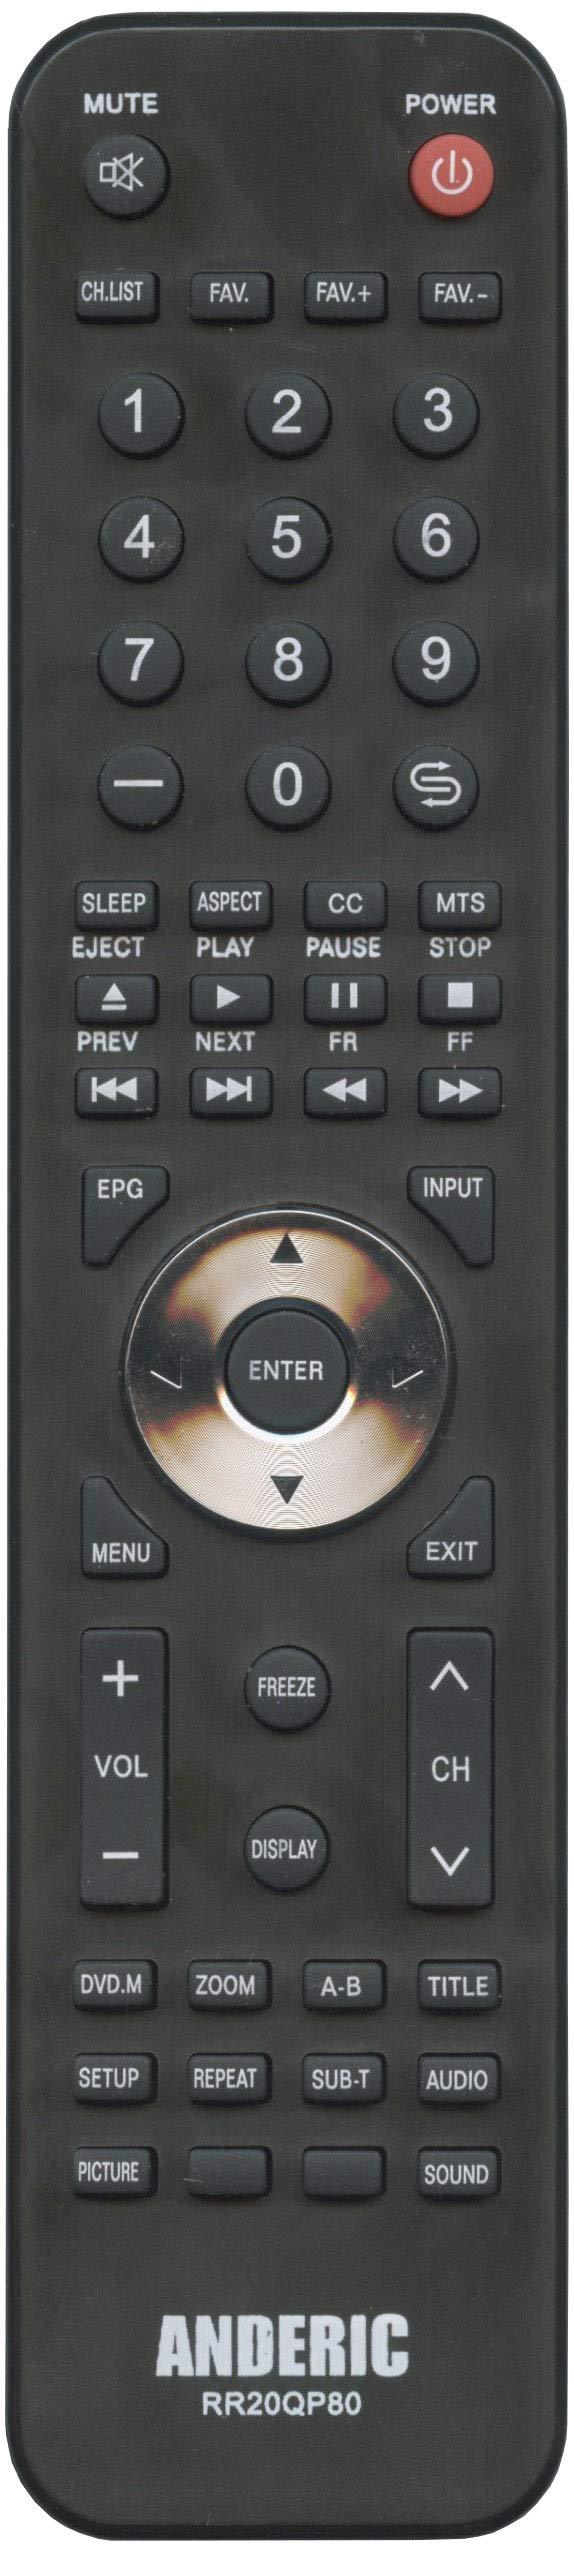 Anderic RCA/Proscan RE20QP80 TV/DVD Replacement Remote for RE20QP06 RE20QP08 RE20QP13 RE20QP14 RE20QP00 RE20QP18 CSTRE20QP18 RE20QP56 RE20QP05 RE20QP11 RE20QP28 RE20QP29 RE20QP80 RE20QP83